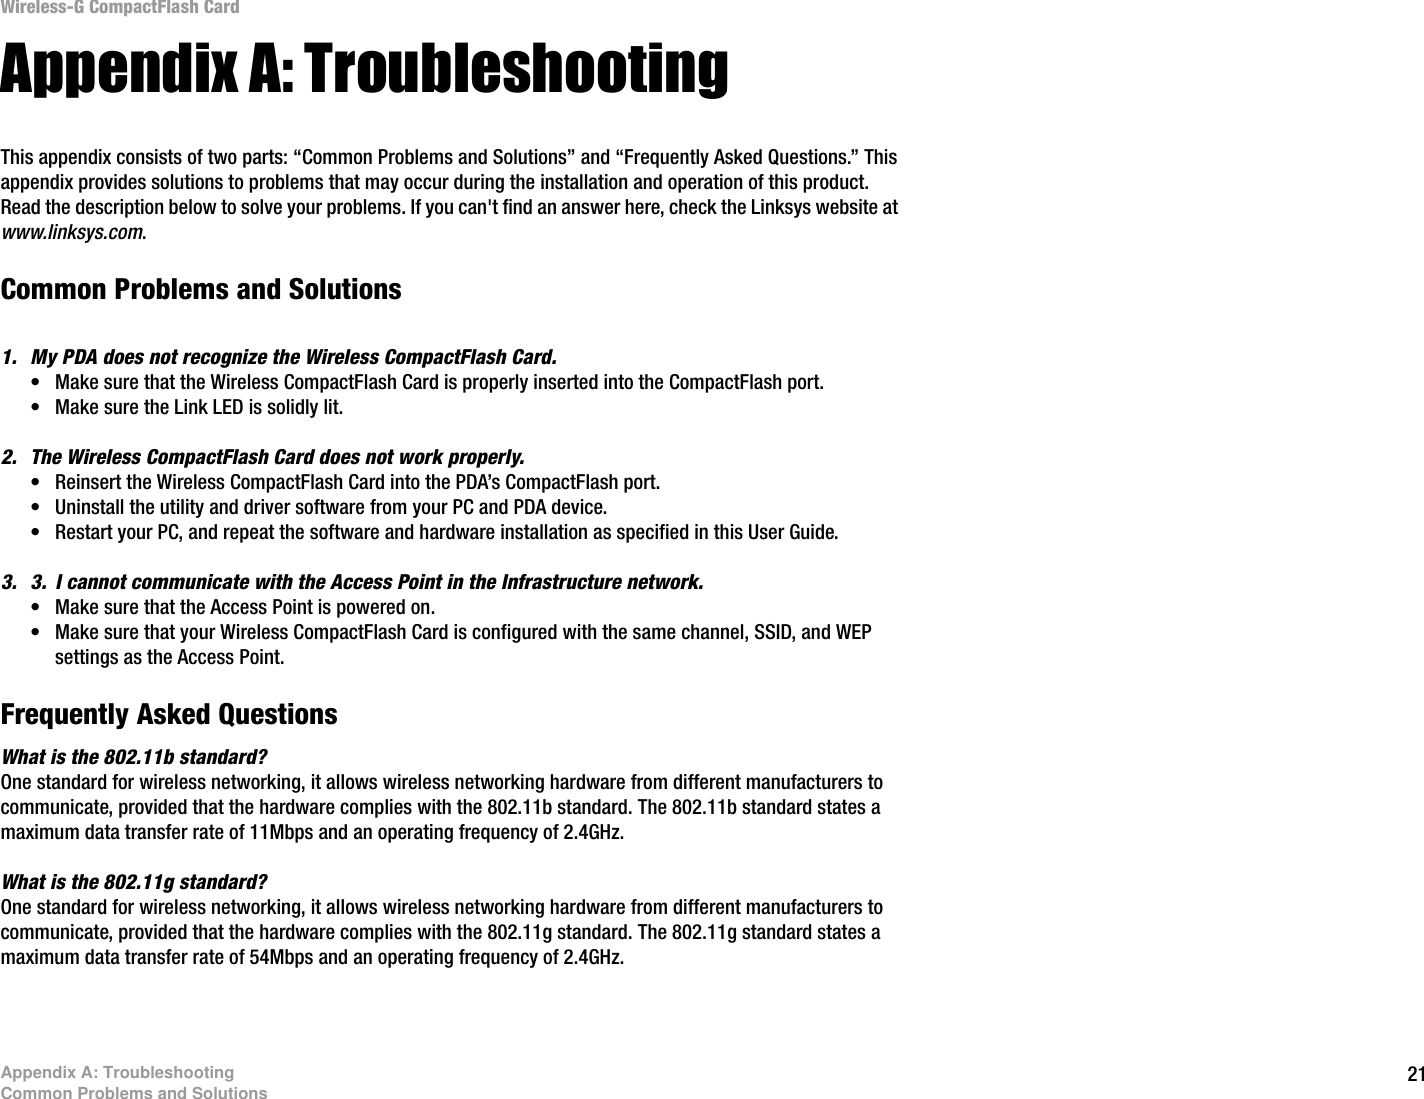 21Appendix A: TroubleshootingCommon Problems and SolutionsWireless-G CompactFlash CardAppendix A: TroubleshootingThis appendix consists of two parts: “Common Problems and Solutions” and “Frequently Asked Questions.” This appendix provides solutions to problems that may occur during the installation and operation of this product. Read the description below to solve your problems. If you can&apos;t find an answer here, check the Linksys website at www.linksys.com.Common Problems and Solutions1. My PDA does not recognize the Wireless CompactFlash Card.• Make sure that the Wireless CompactFlash Card is properly inserted into the CompactFlash port.• Make sure the Link LED is solidly lit.2. The Wireless CompactFlash Card does not work properly.• Reinsert the Wireless CompactFlash Card into the PDA’s CompactFlash port.• Uninstall the utility and driver software from your PC and PDA device.• Restart your PC, and repeat the software and hardware installation as specified in this User Guide.3. 3. I cannot communicate with the Access Point in the Infrastructure network.• Make sure that the Access Point is powered on.• Make sure that your Wireless CompactFlash Card is configured with the same channel, SSID, and WEP settings as the Access Point.Frequently Asked QuestionsWhat is the 802.11b standard?One standard for wireless networking, it allows wireless networking hardware from different manufacturers to communicate, provided that the hardware complies with the 802.11b standard. The 802.11b standard states a maximum data transfer rate of 11Mbps and an operating frequency of 2.4GHz.What is the 802.11g standard?One standard for wireless networking, it allows wireless networking hardware from different manufacturers to communicate, provided that the hardware complies with the 802.11g standard. The 802.11g standard states a maximum data transfer rate of 54Mbps and an operating frequency of 2.4GHz. 